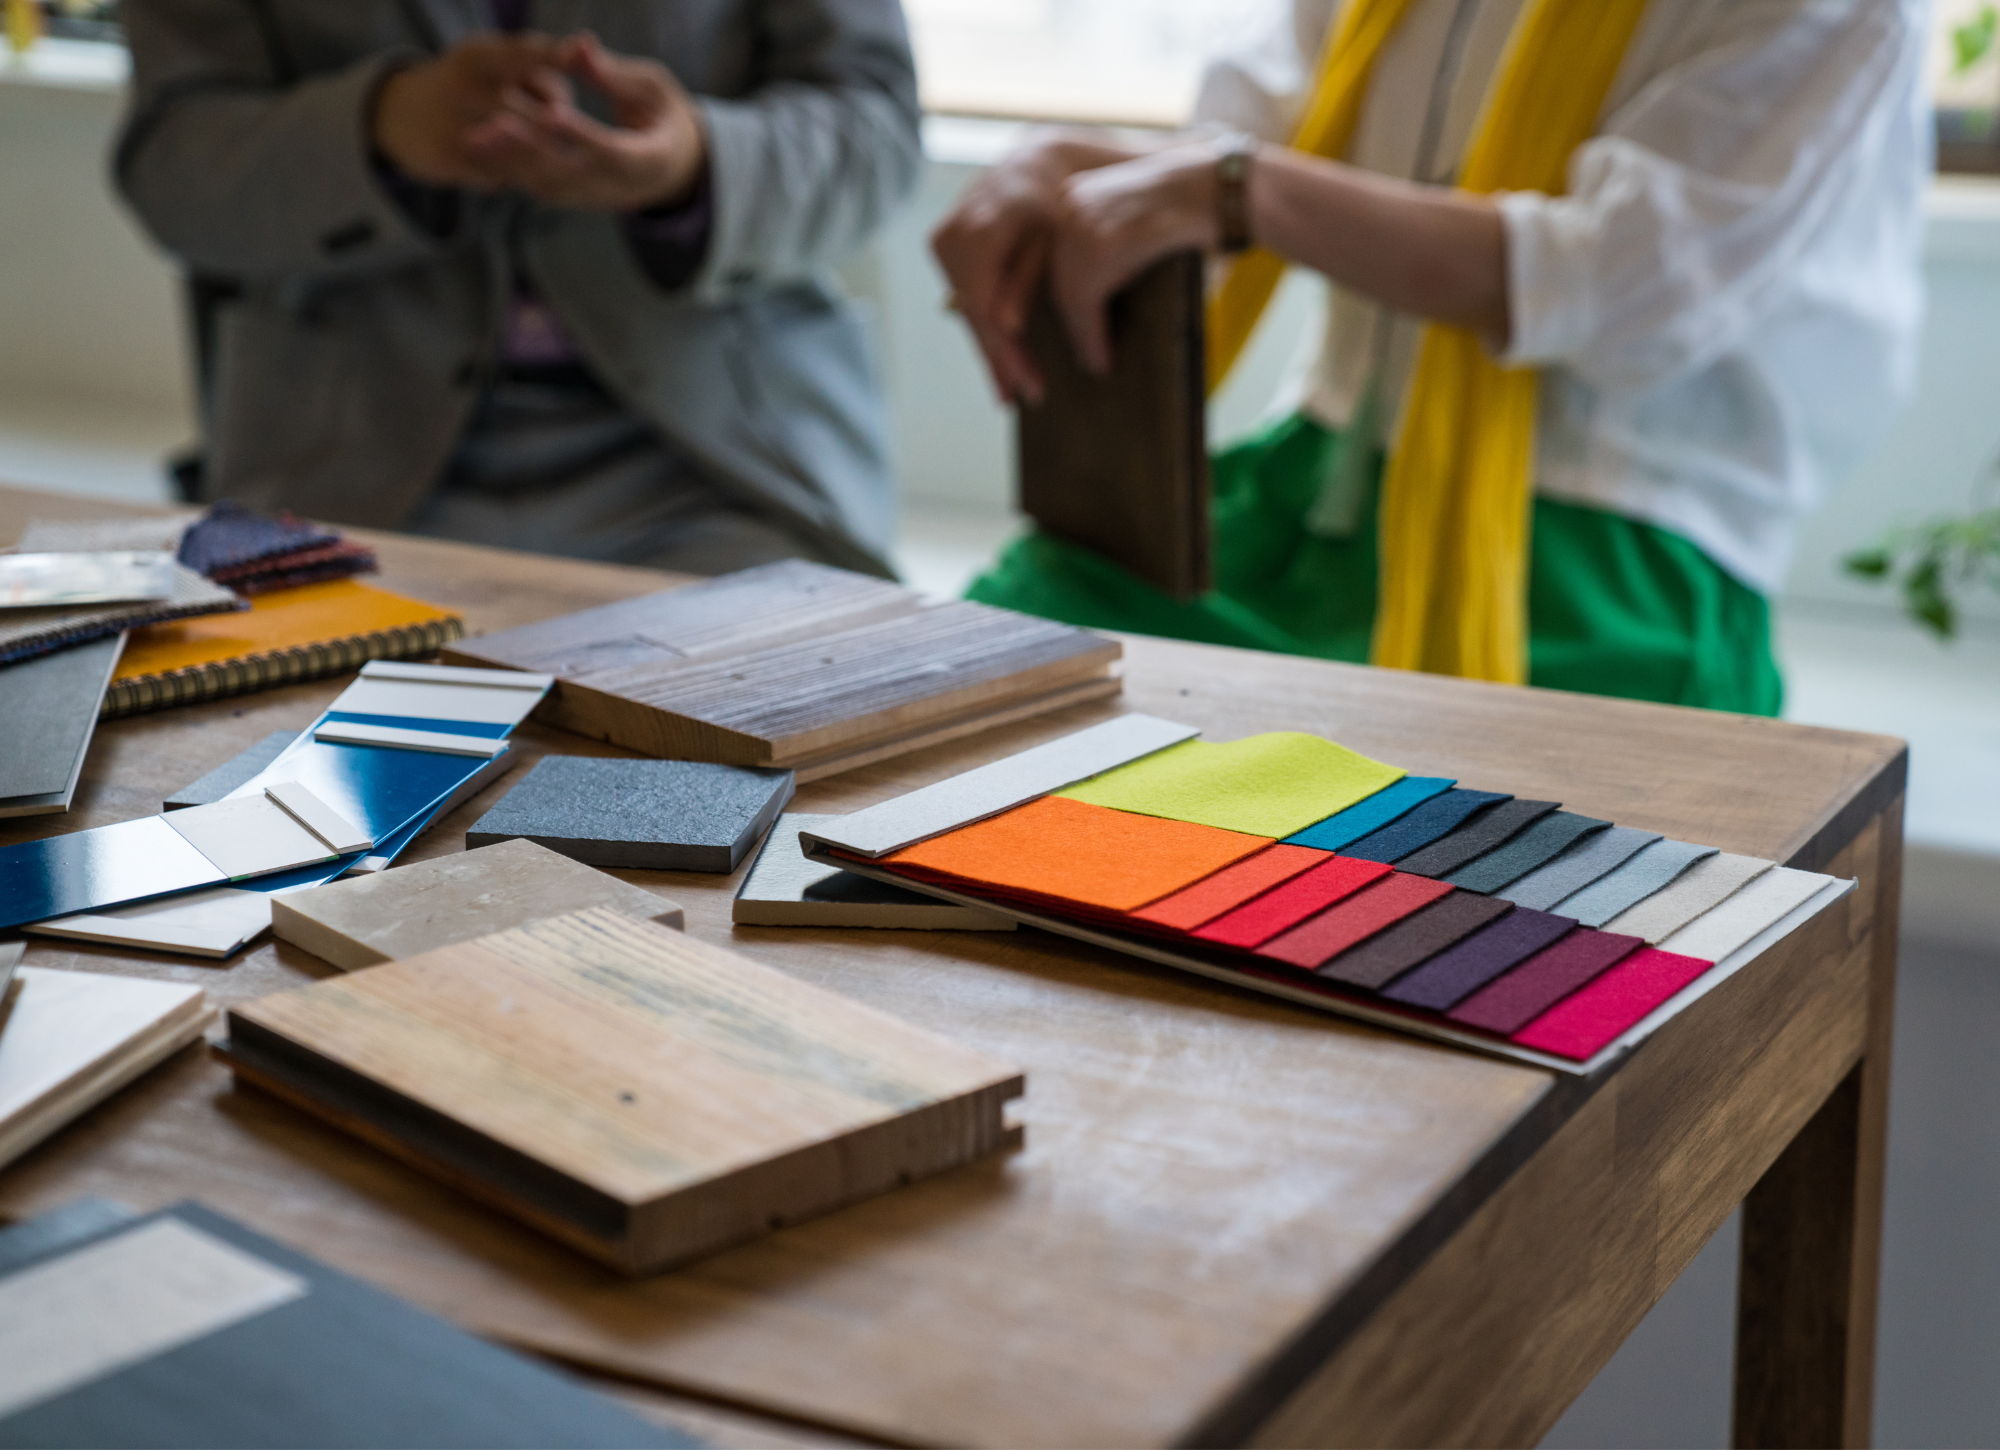 How Texture, Materials & Colours Affect the Work Environment